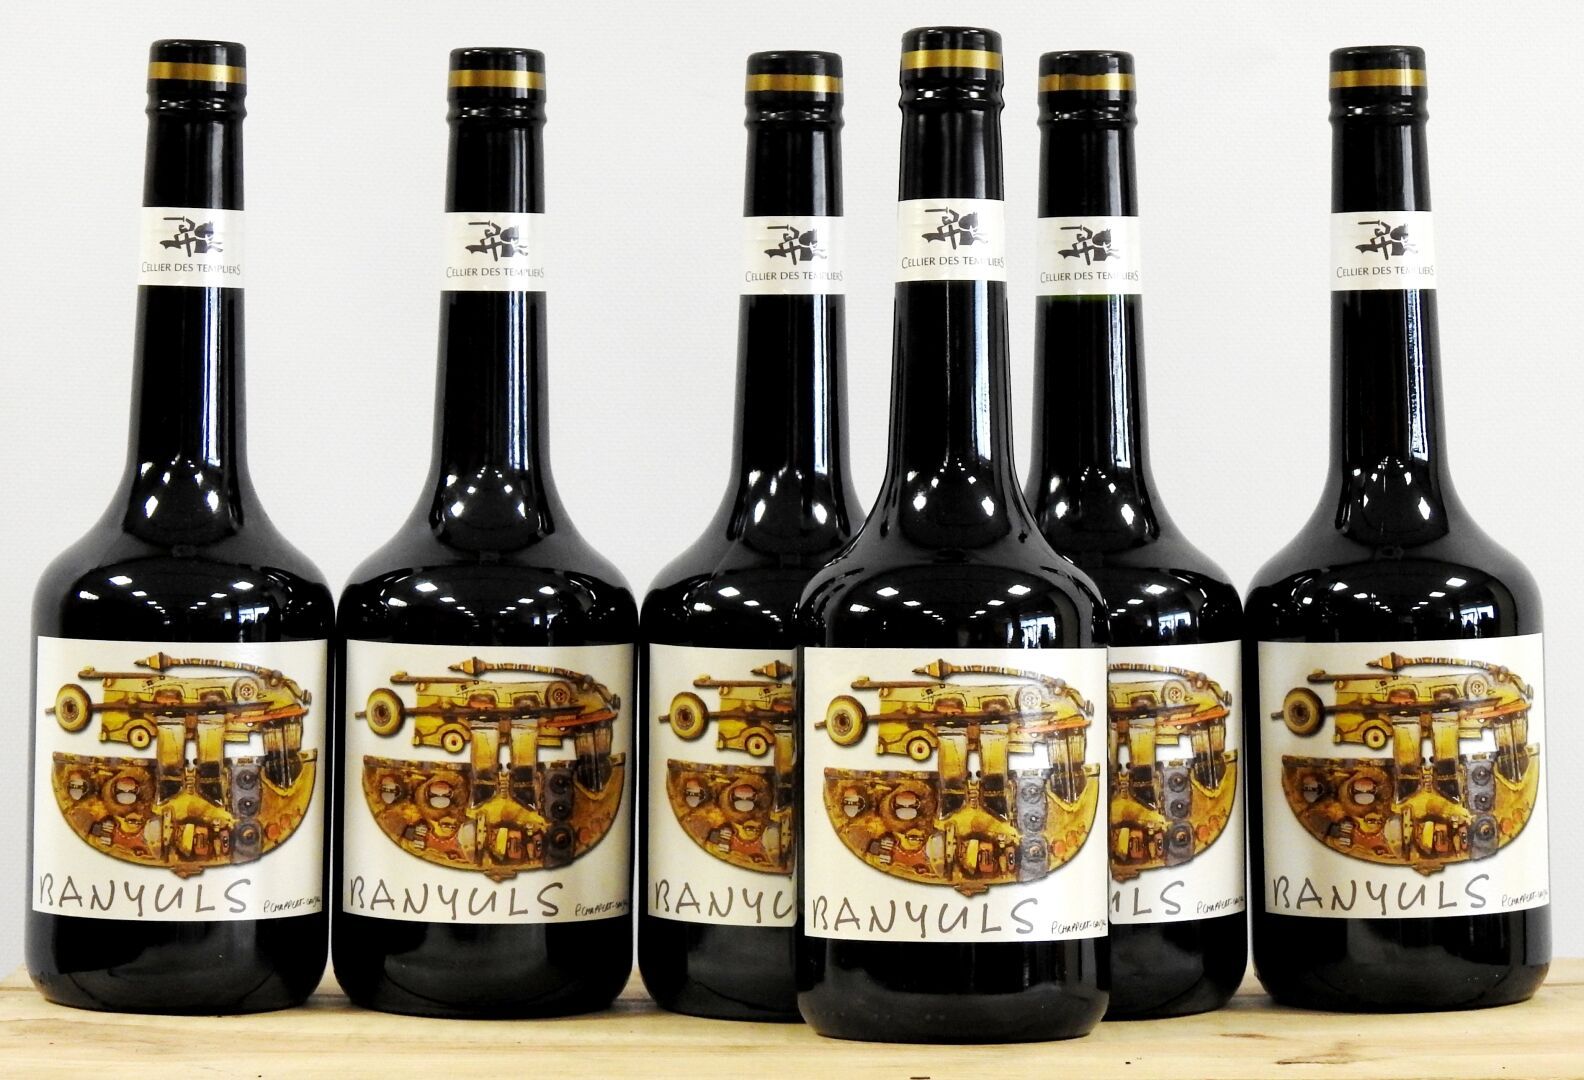 Null 6 bottles

Banyuls - series "Banyuls Art Collection" illustrated by Patrick&hellip;